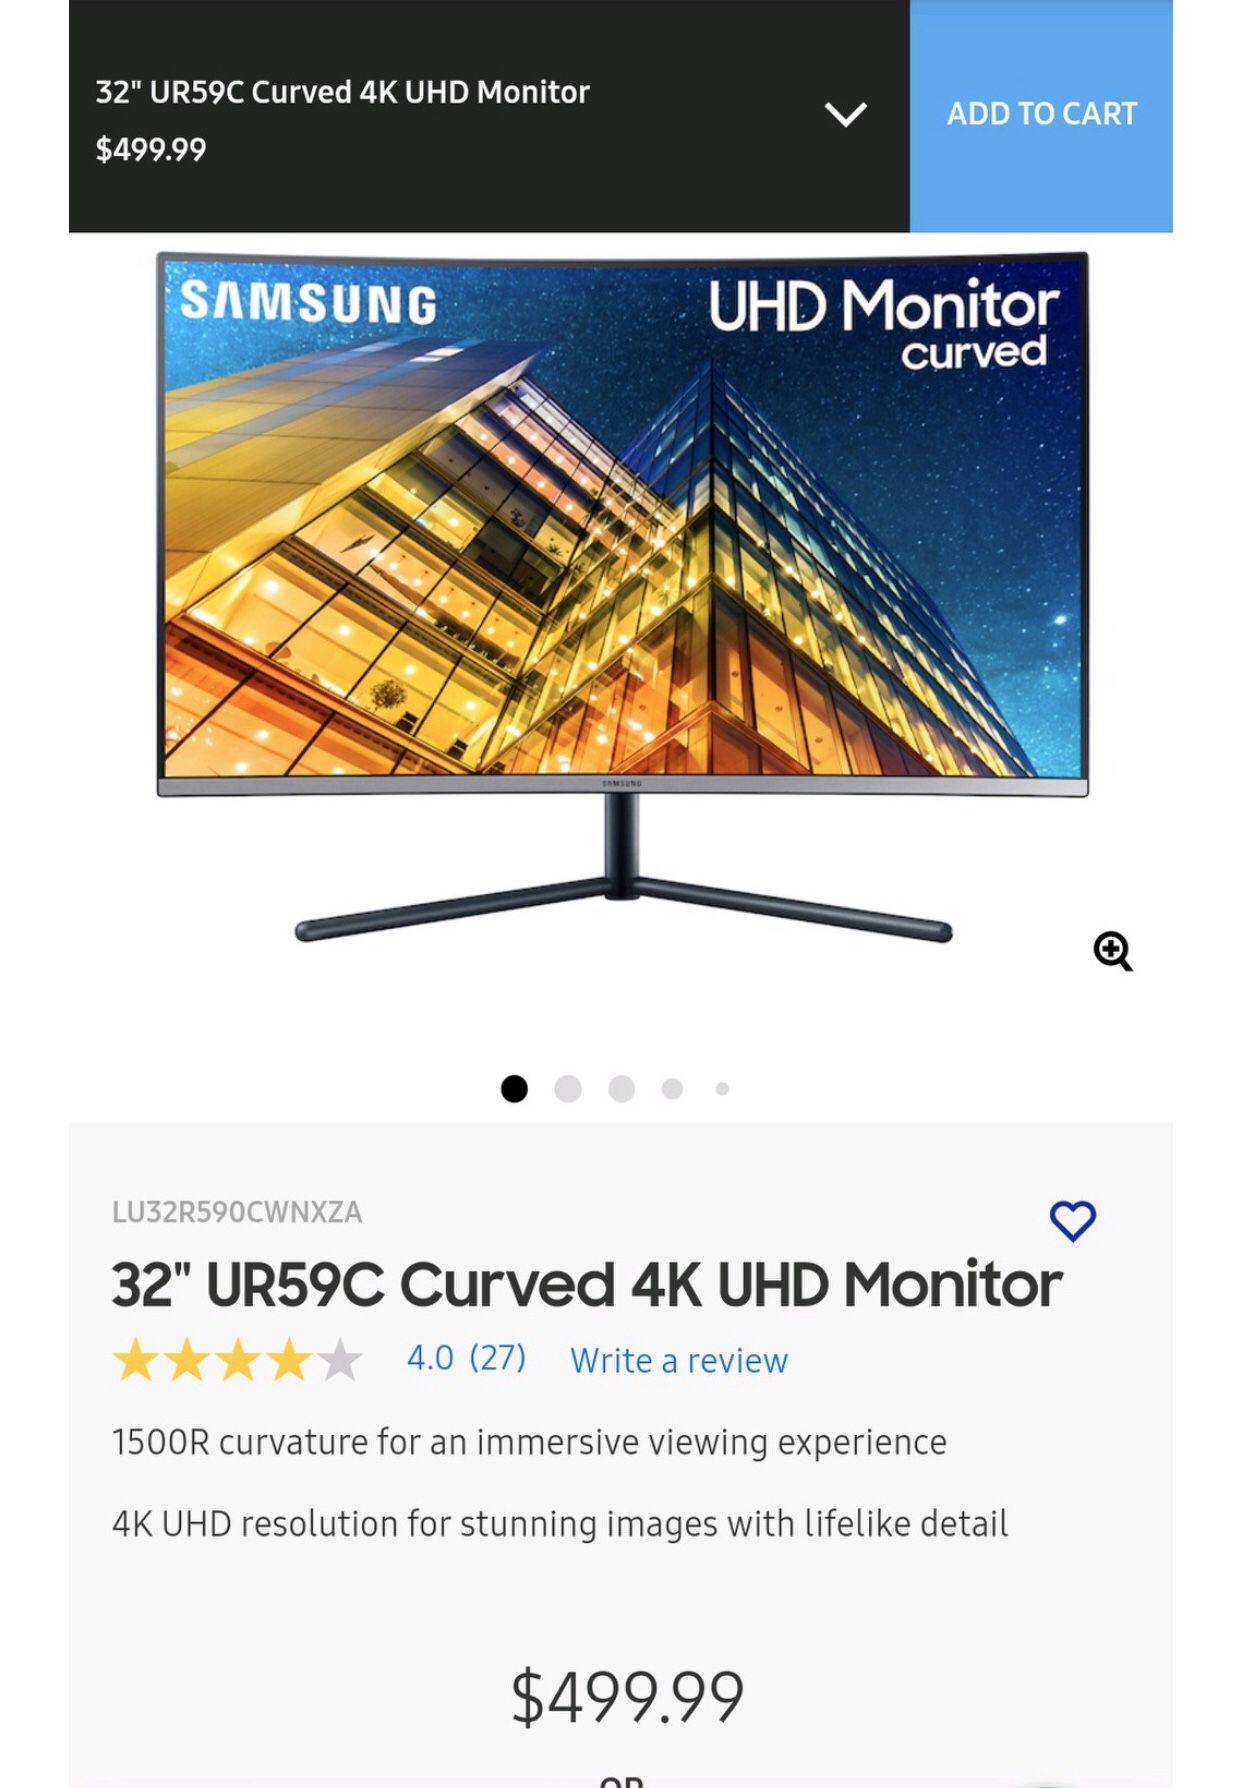 32” curved 4K UHD monitor